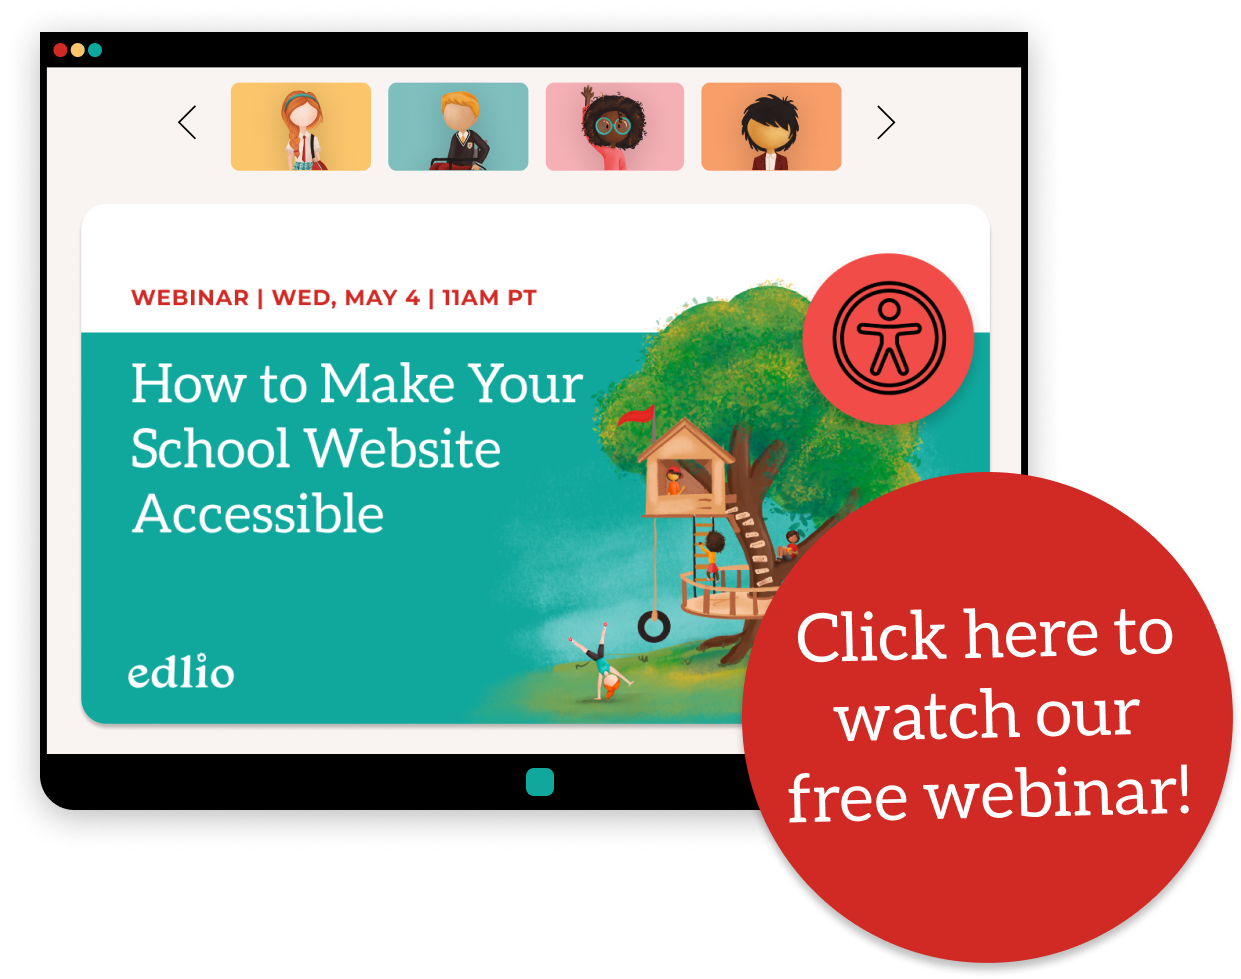 Click here to watch our free webinar!